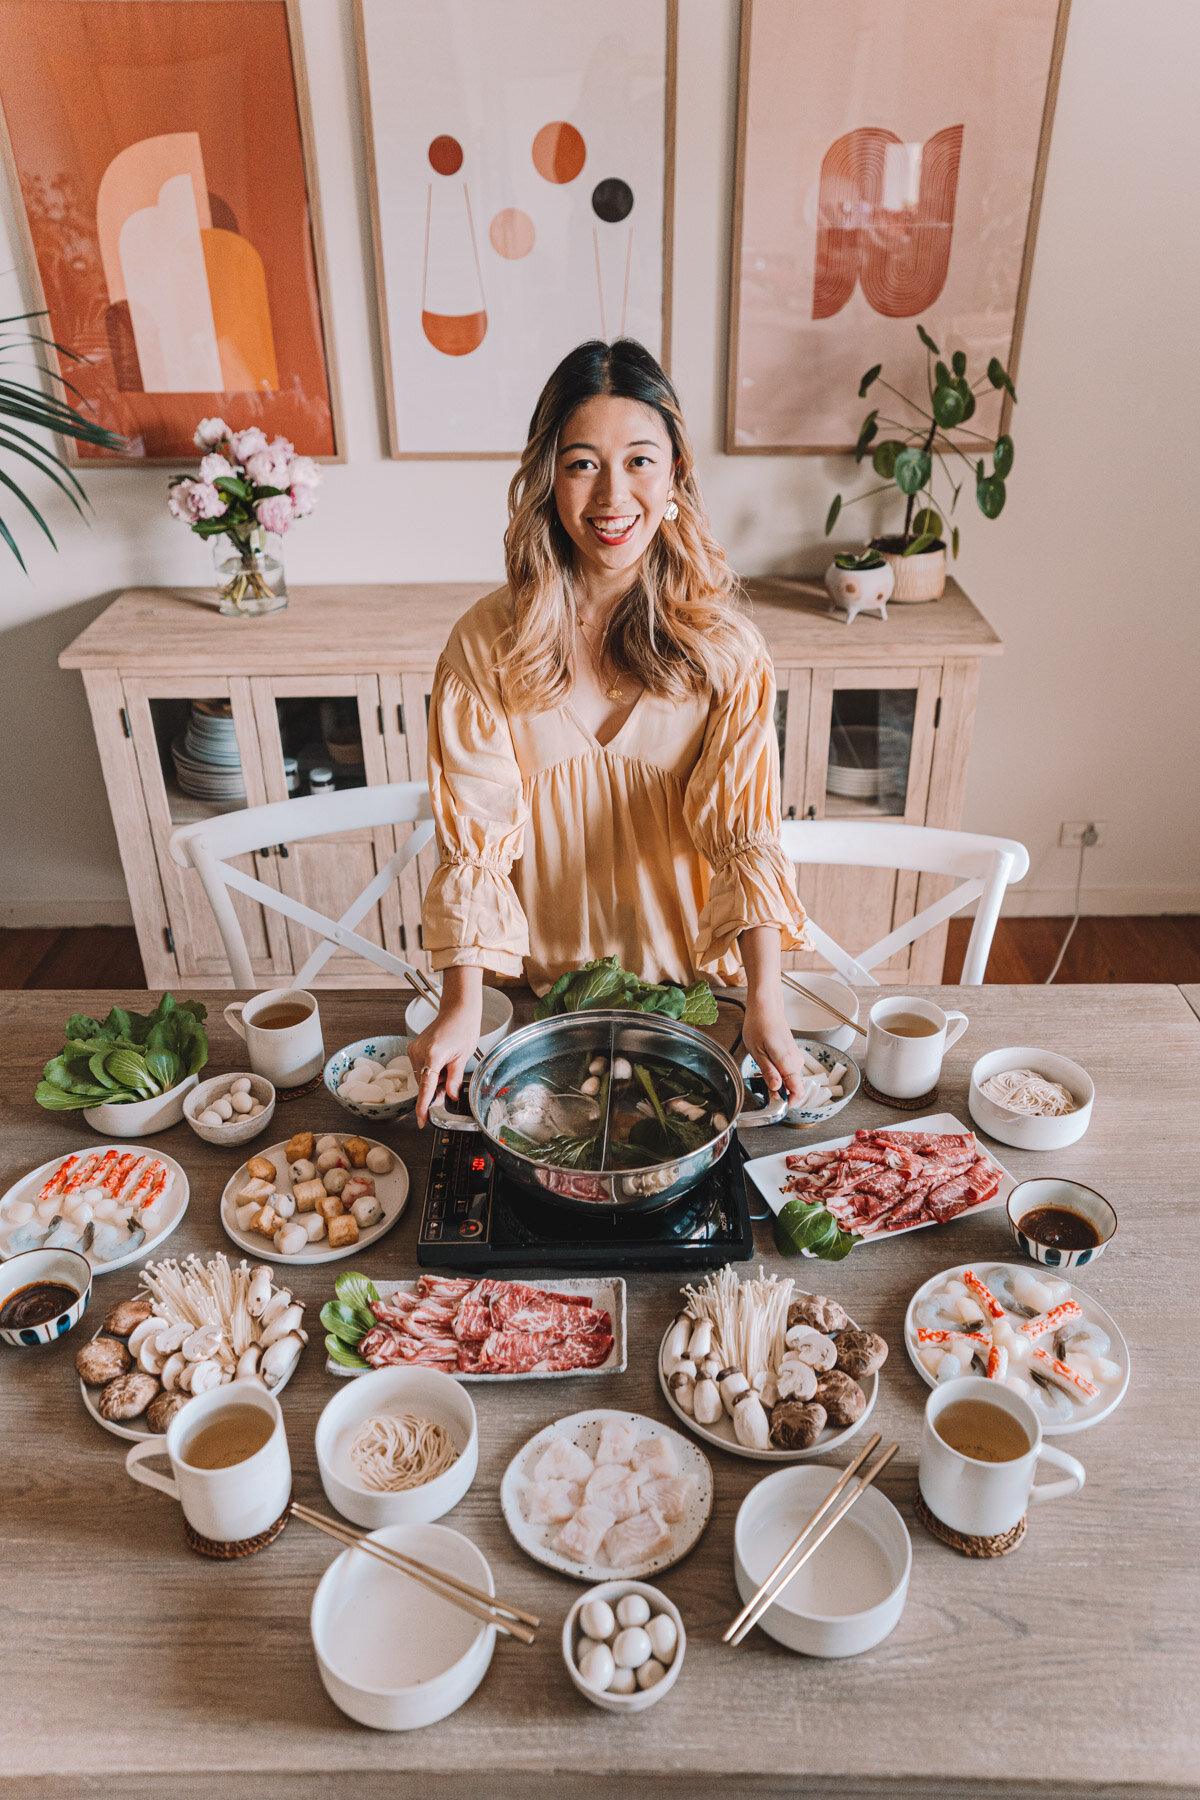 Home style hot pot dining